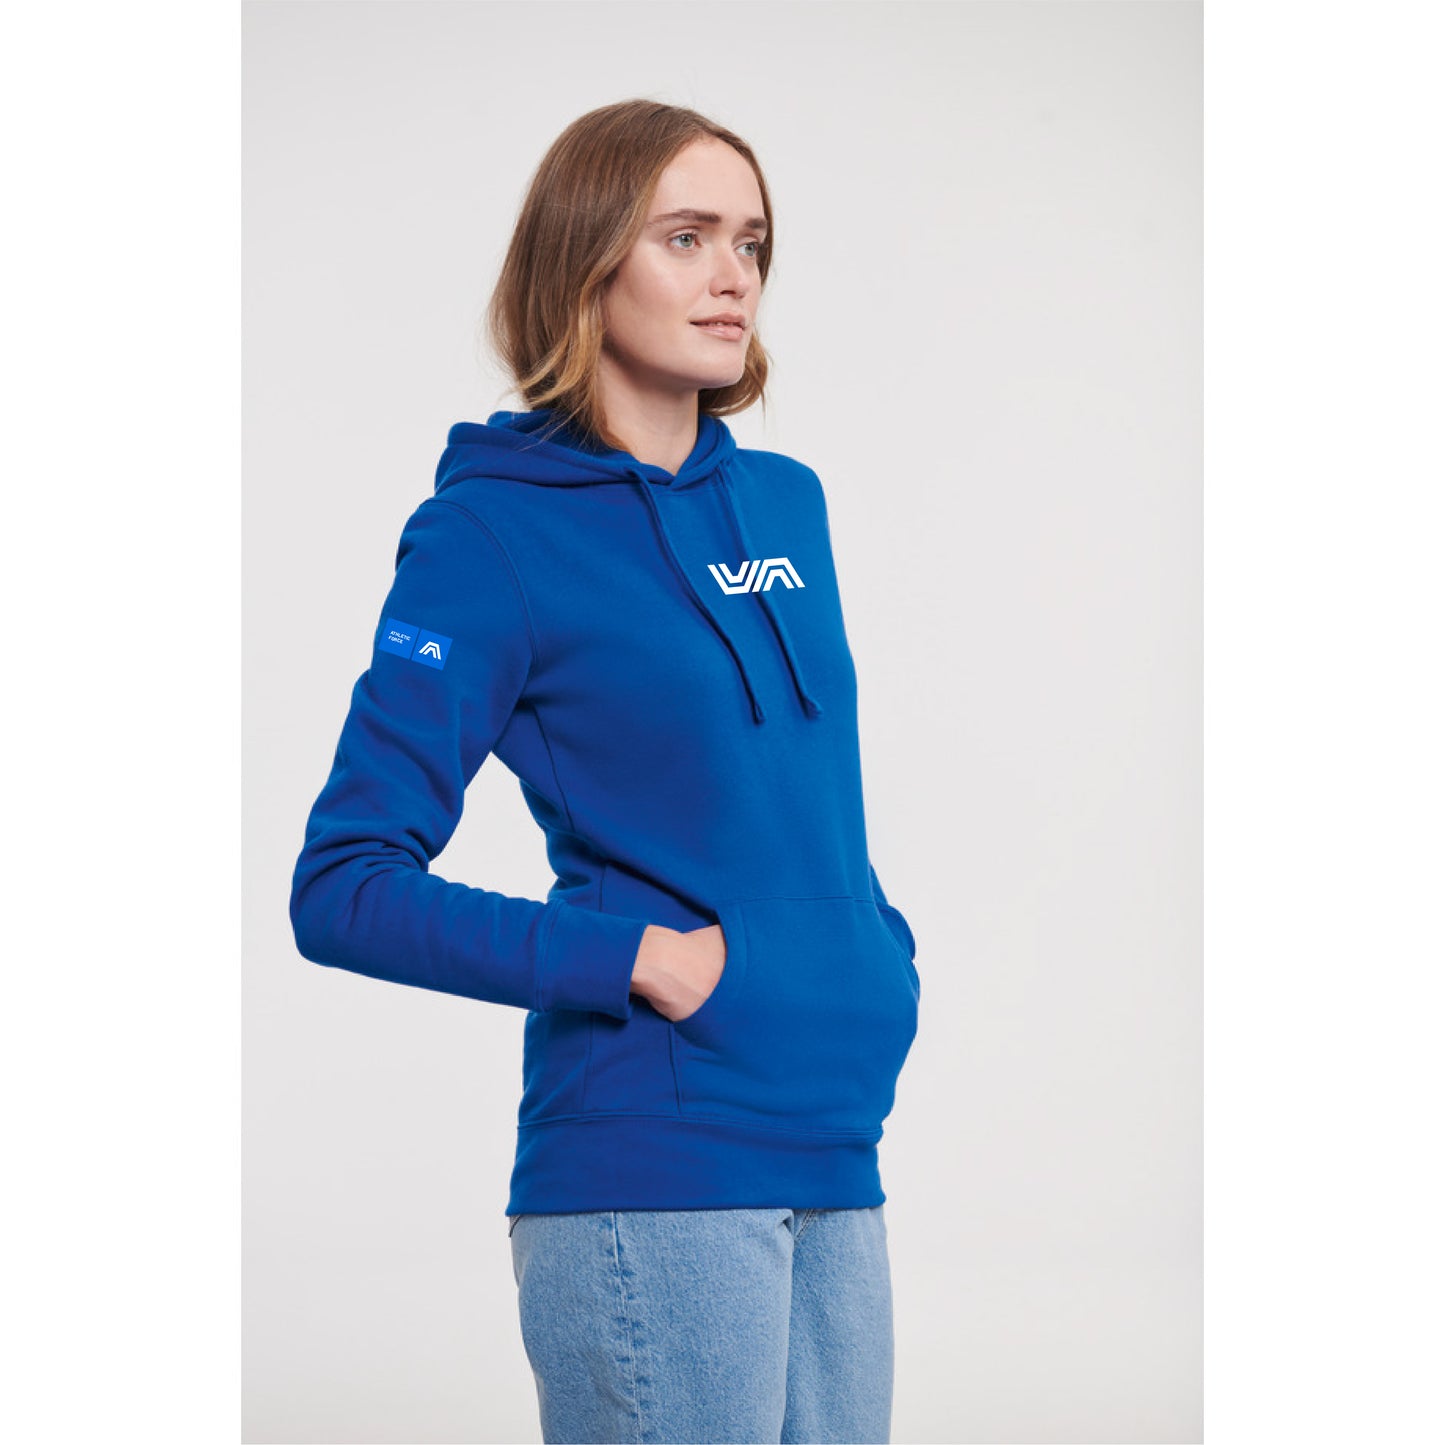 Marine Force ® Fluctuation Identity Hoodie